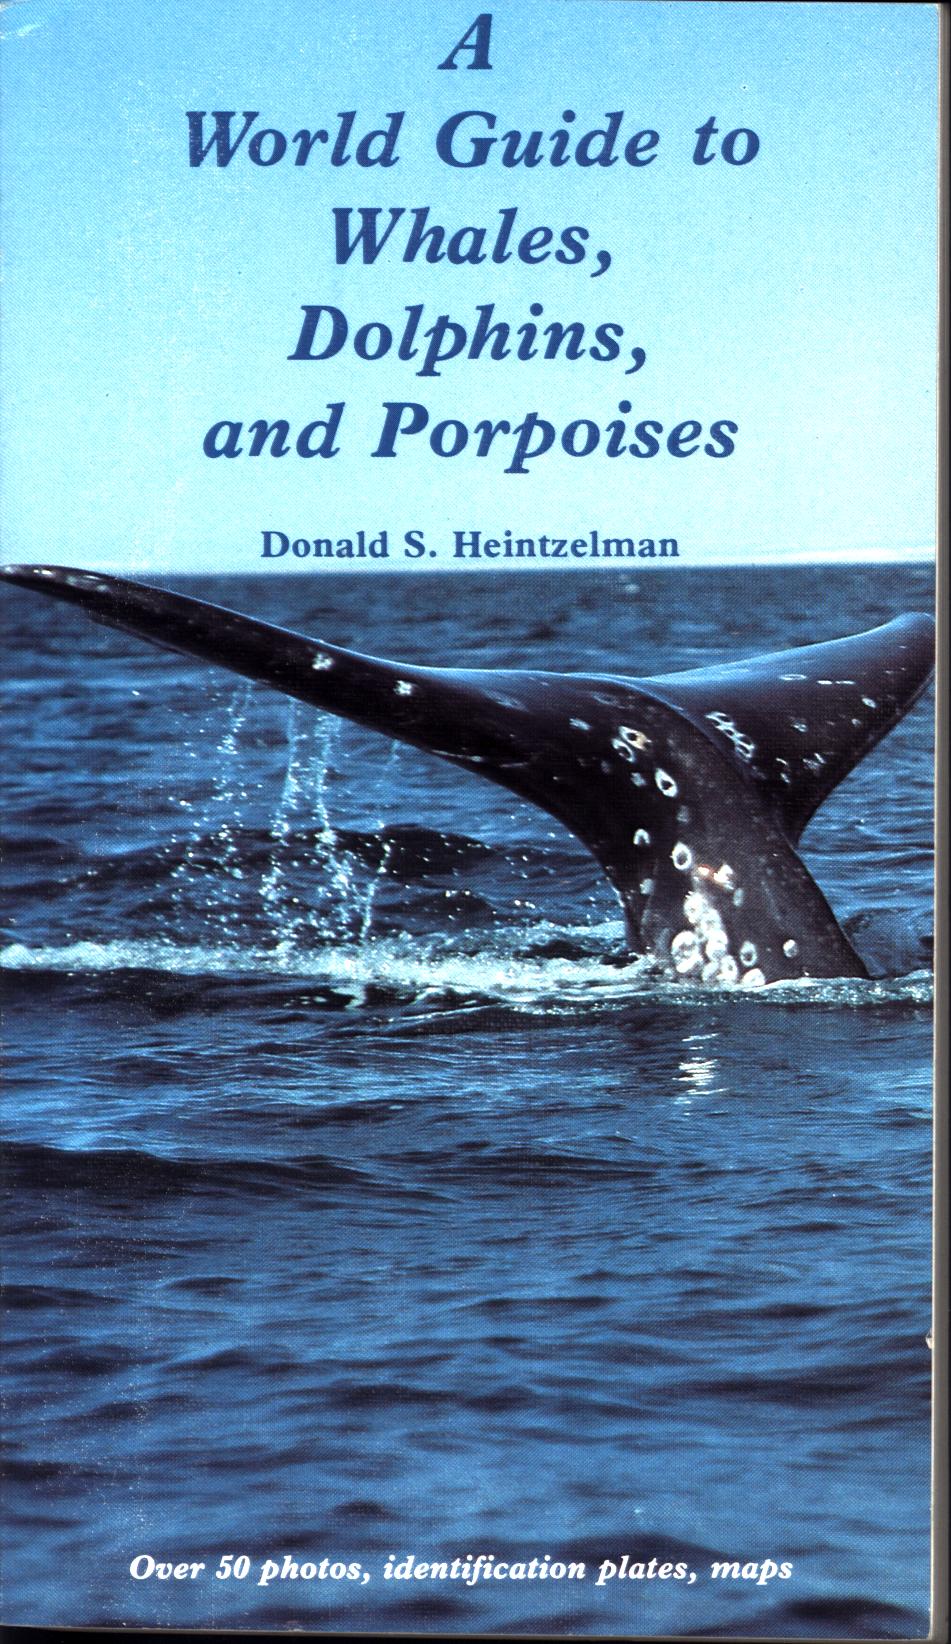 A WORLD GUIDE TO WHALES, DOLPHINS, AND PORPOISES. 